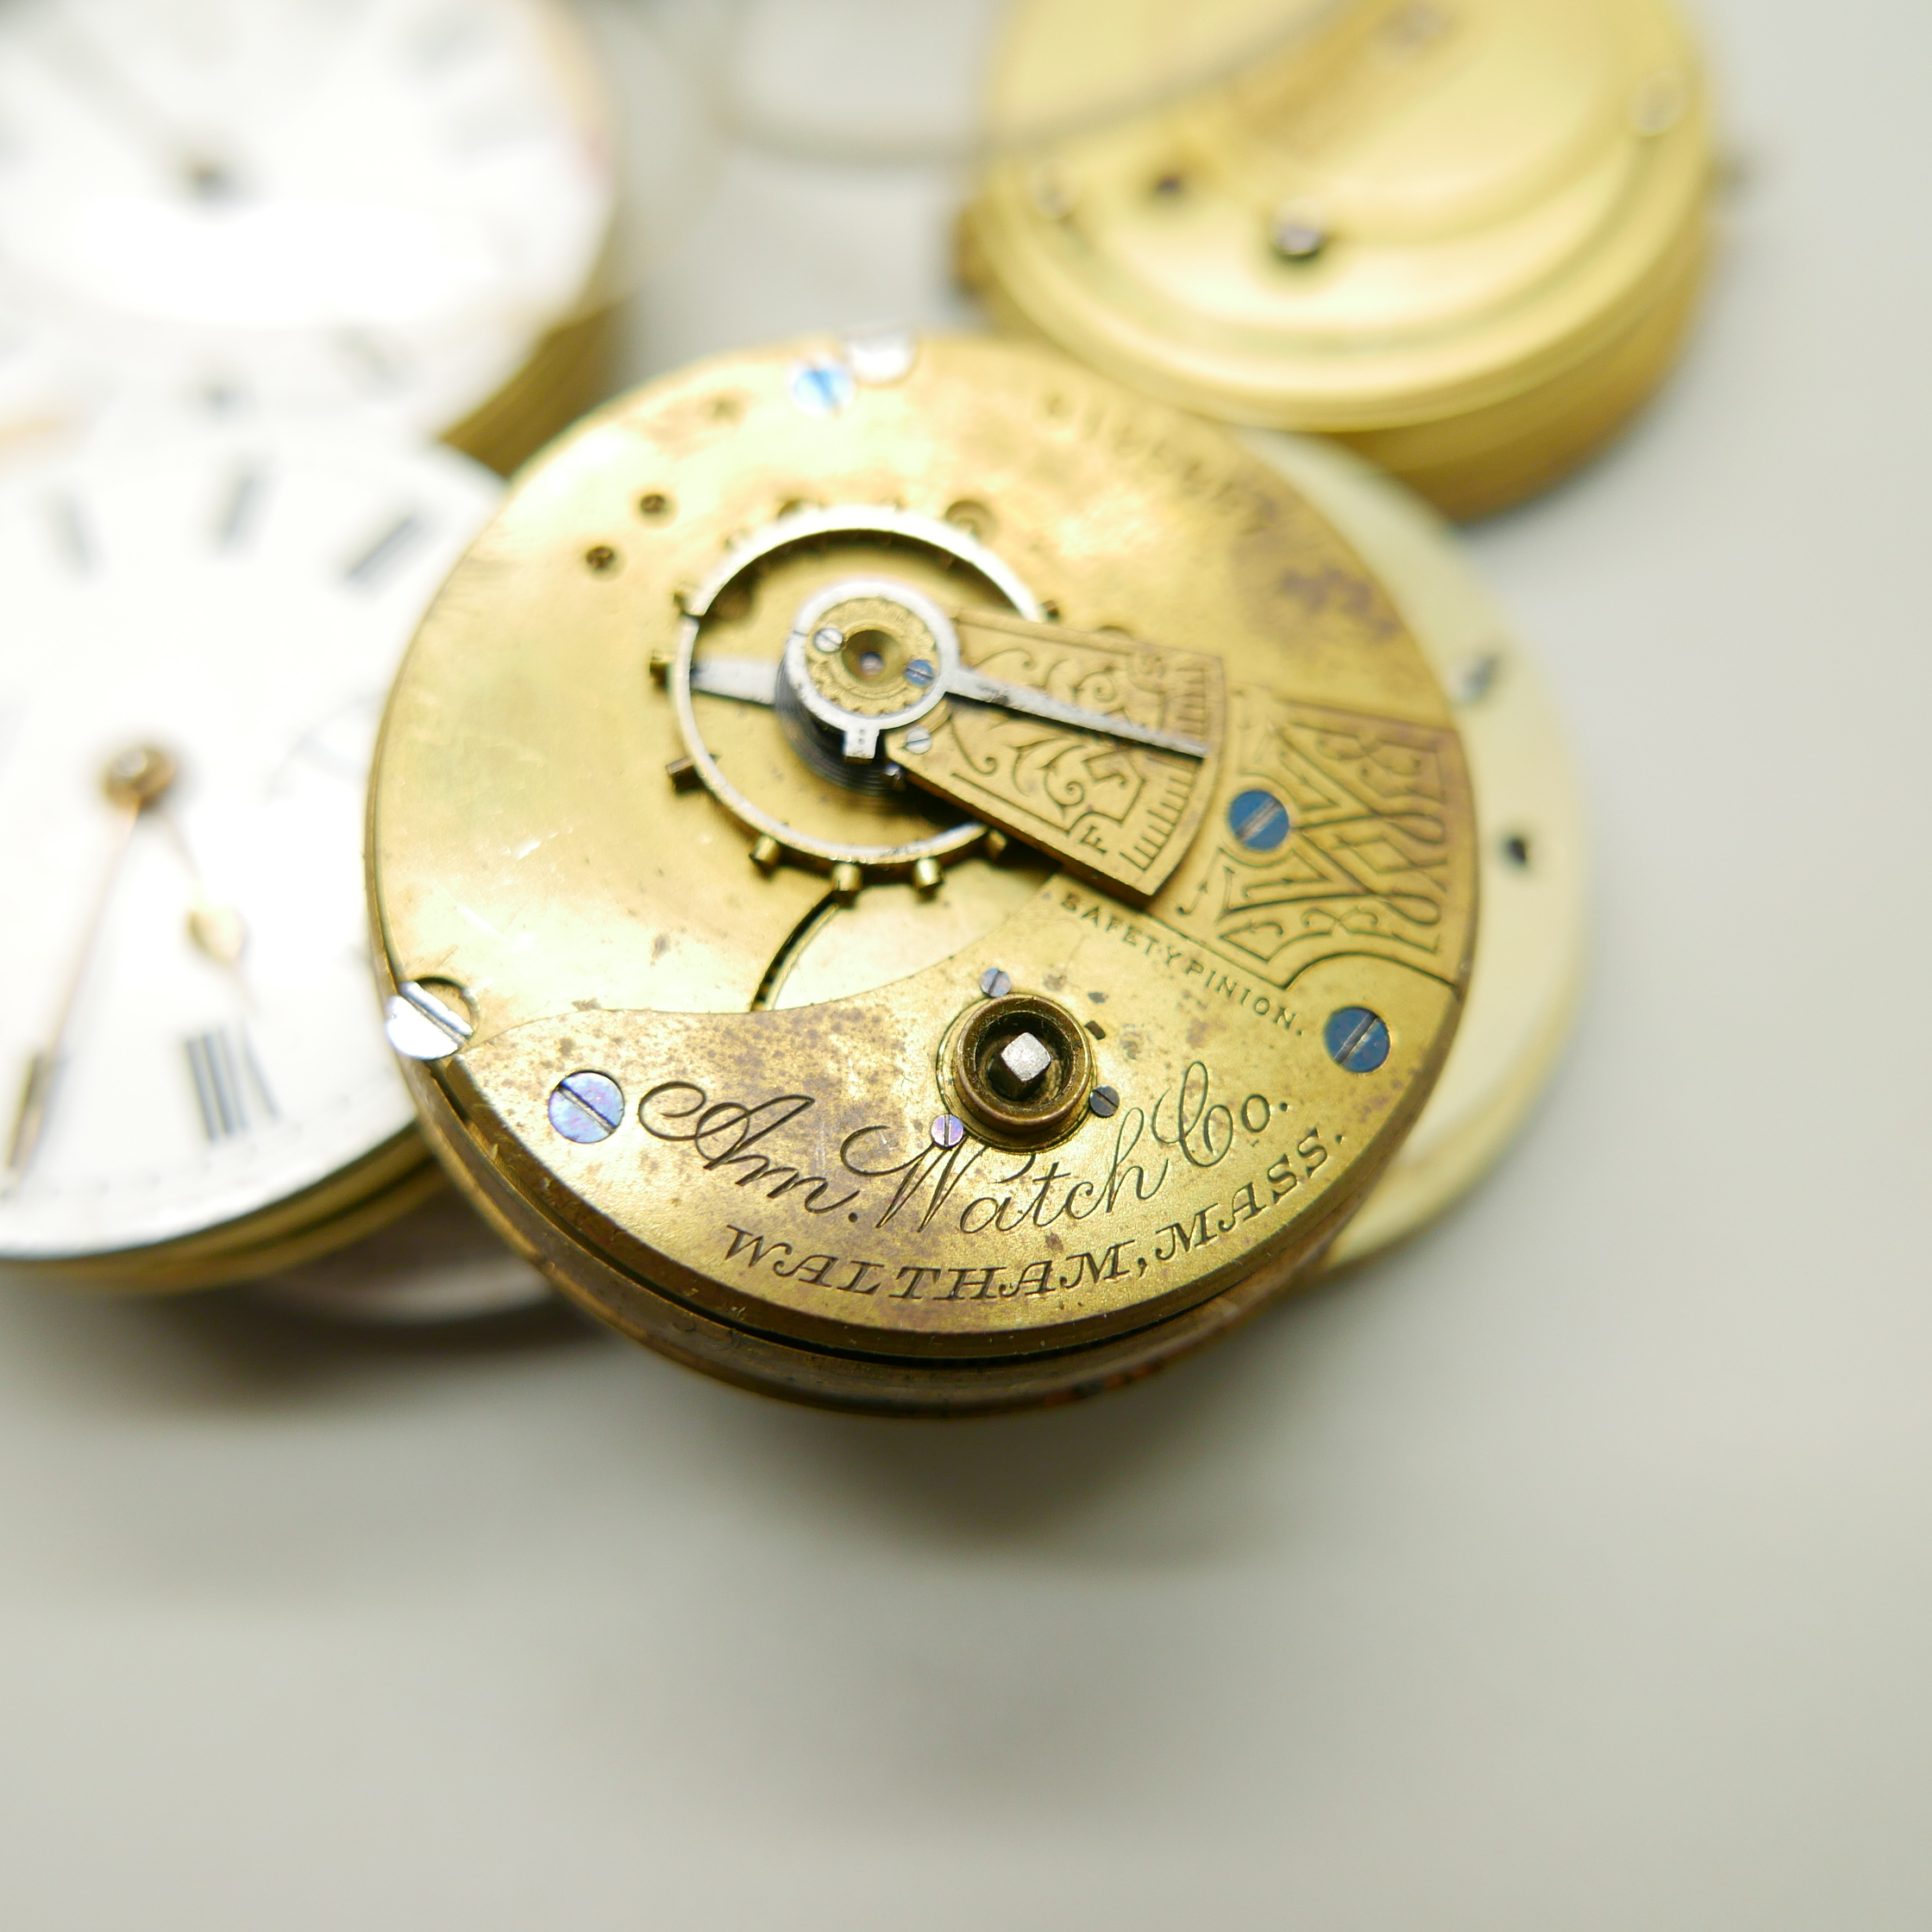 Pocket watch movements - Image 4 of 5